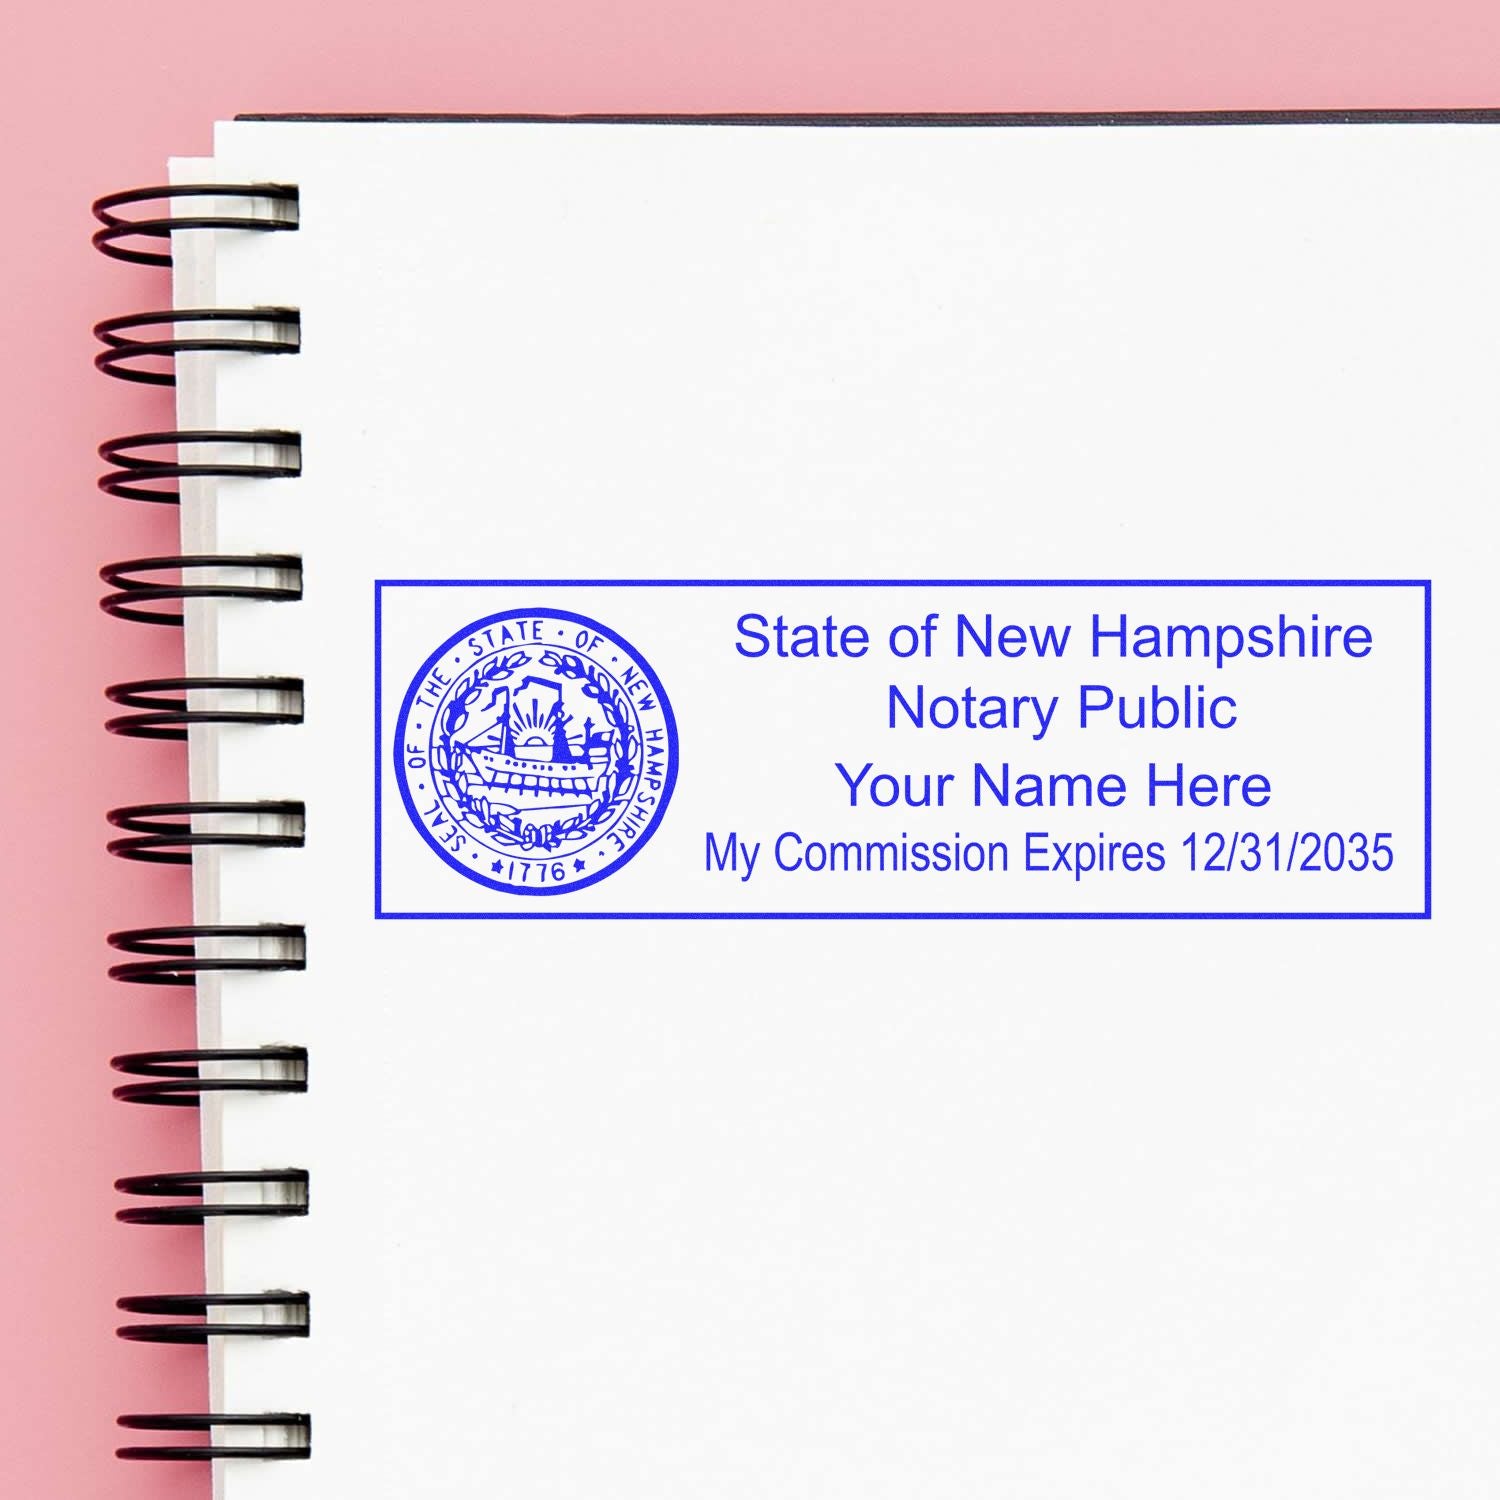 The main image for the Slim Pre-Inked State Seal Notary Stamp for New Hampshire depicting a sample of the imprint and electronic files